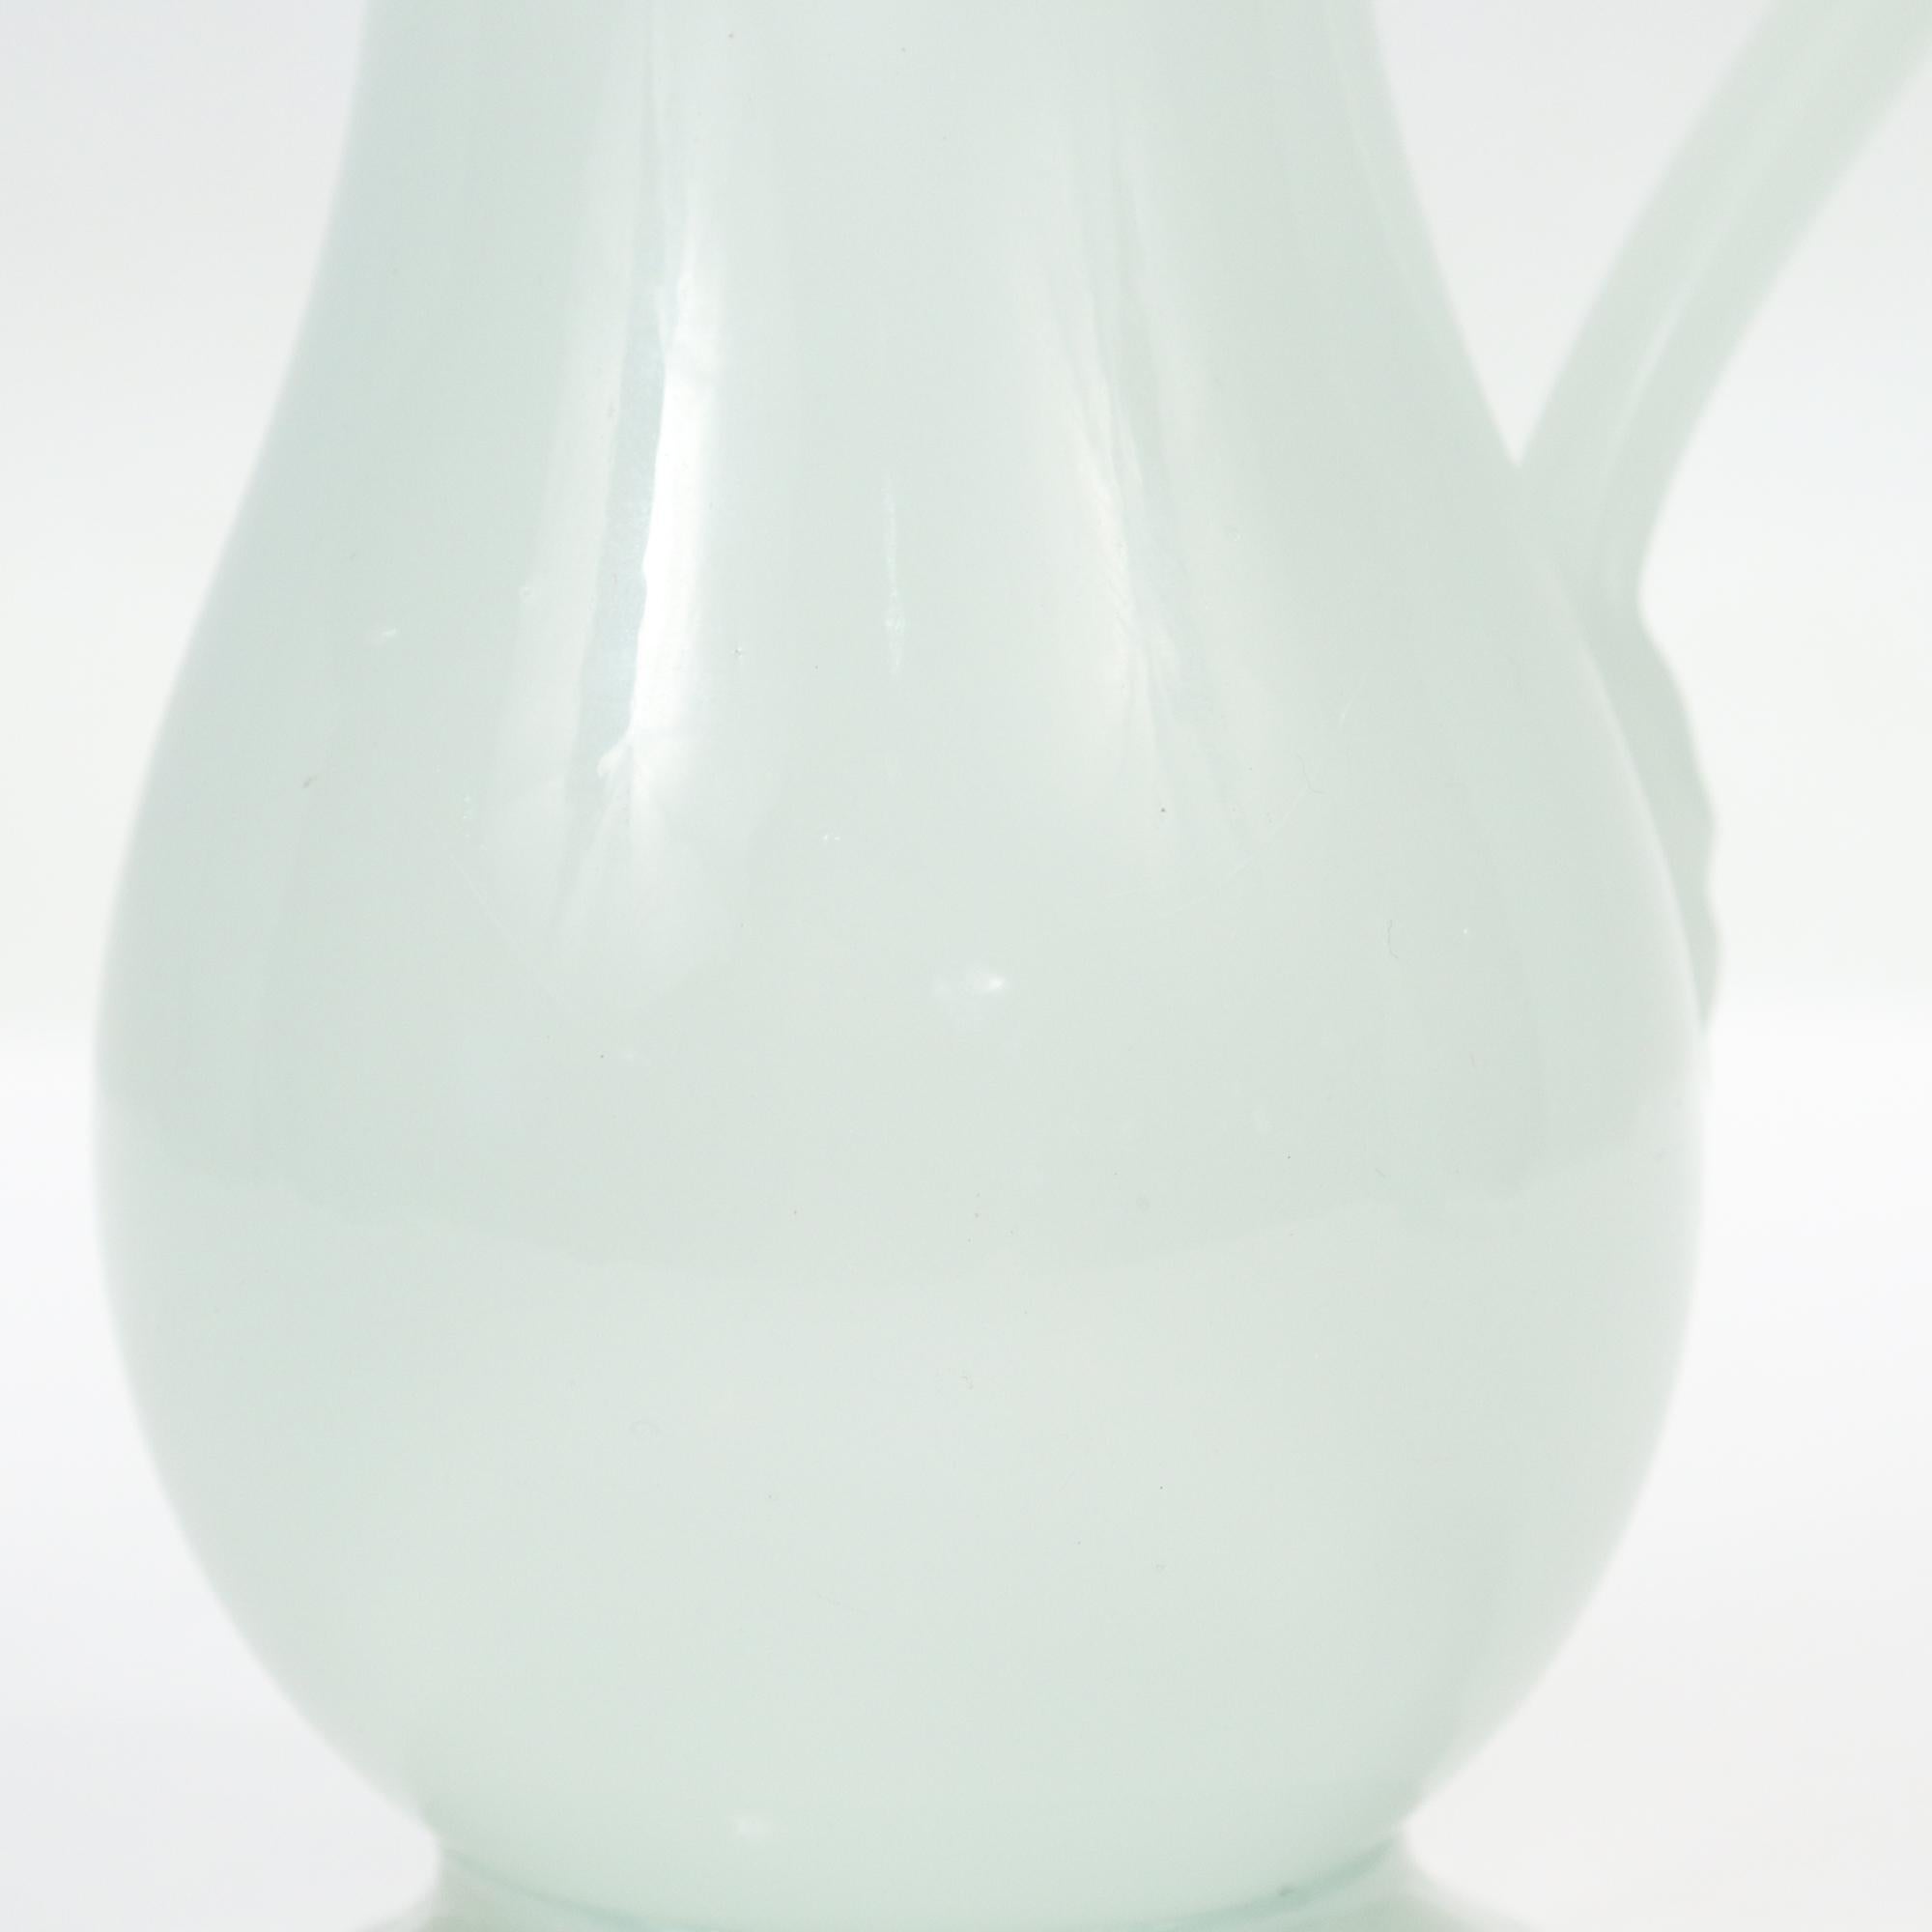 Antique American Clam Broth Glass Creamer or Milk Jug For Sale 2